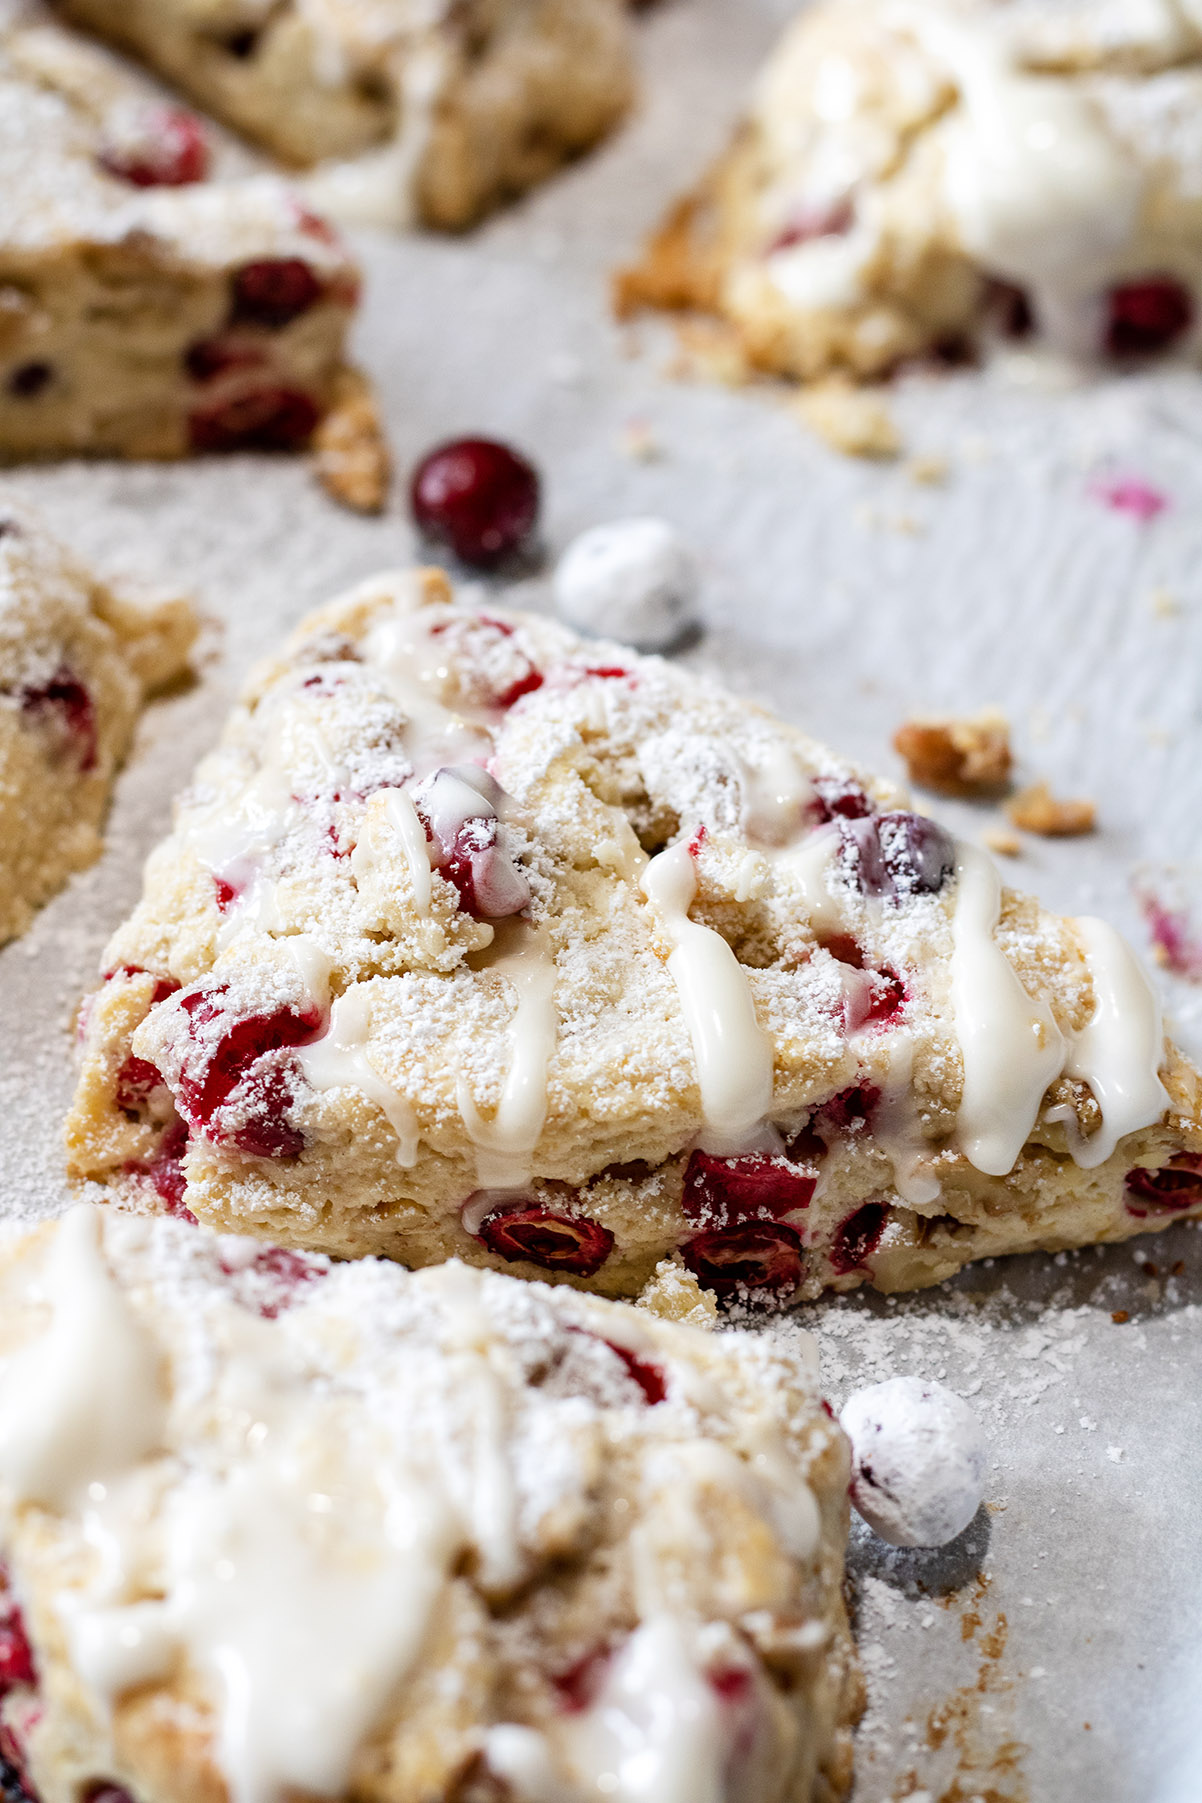 Cranberry scones with walnuts on parchment paper and garnished with a dusting of powdered sugar and drizzle of glaze.